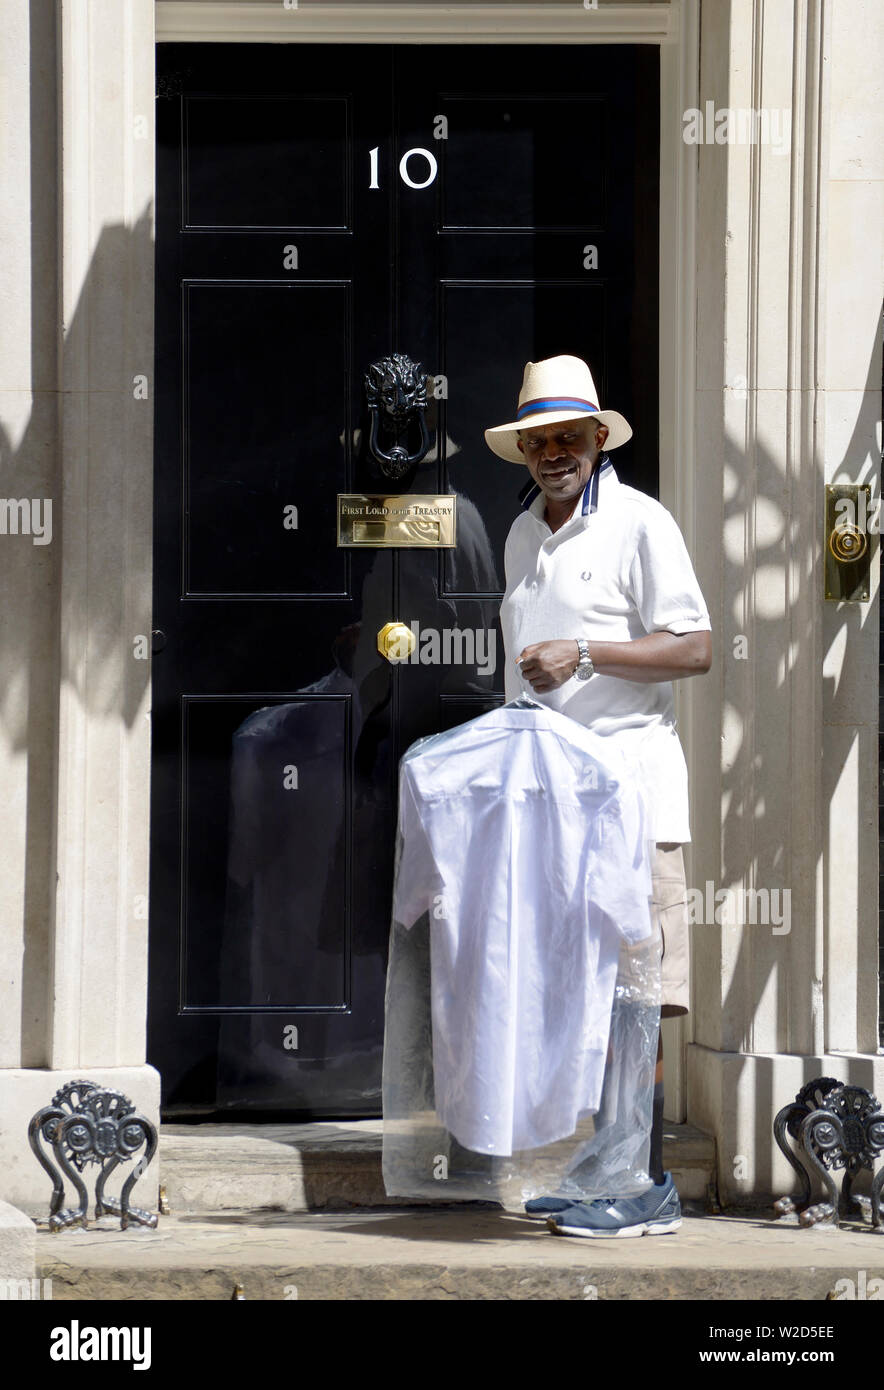 London, England, UK. Black wearing white delivering laundry / dry cleaning to 10 Downing Street Stock Photo